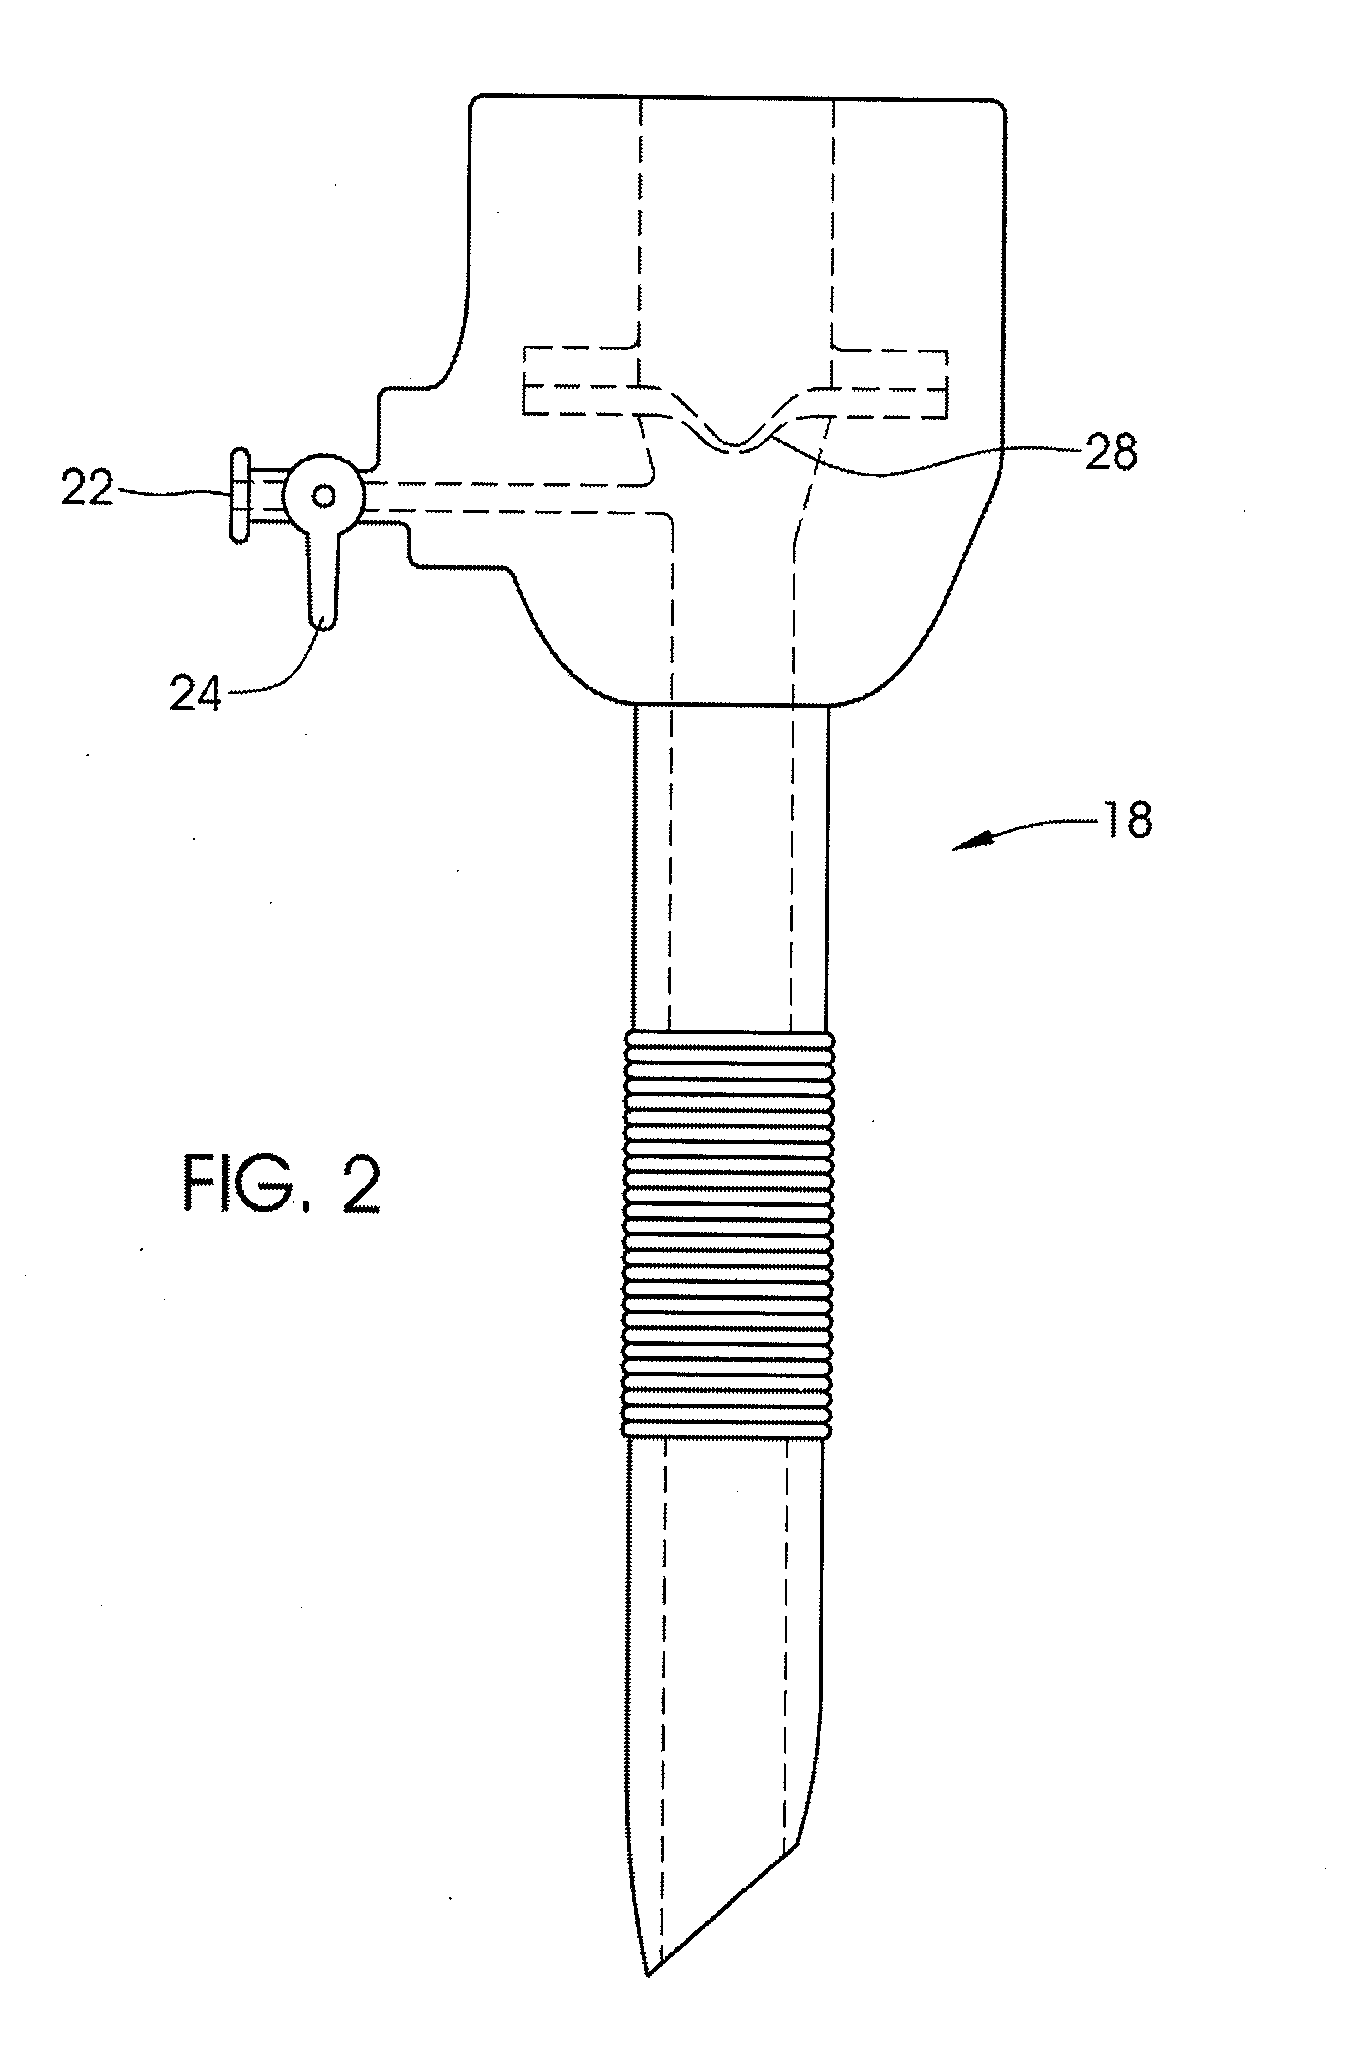 System and method for securing an implantable interface to a mammal